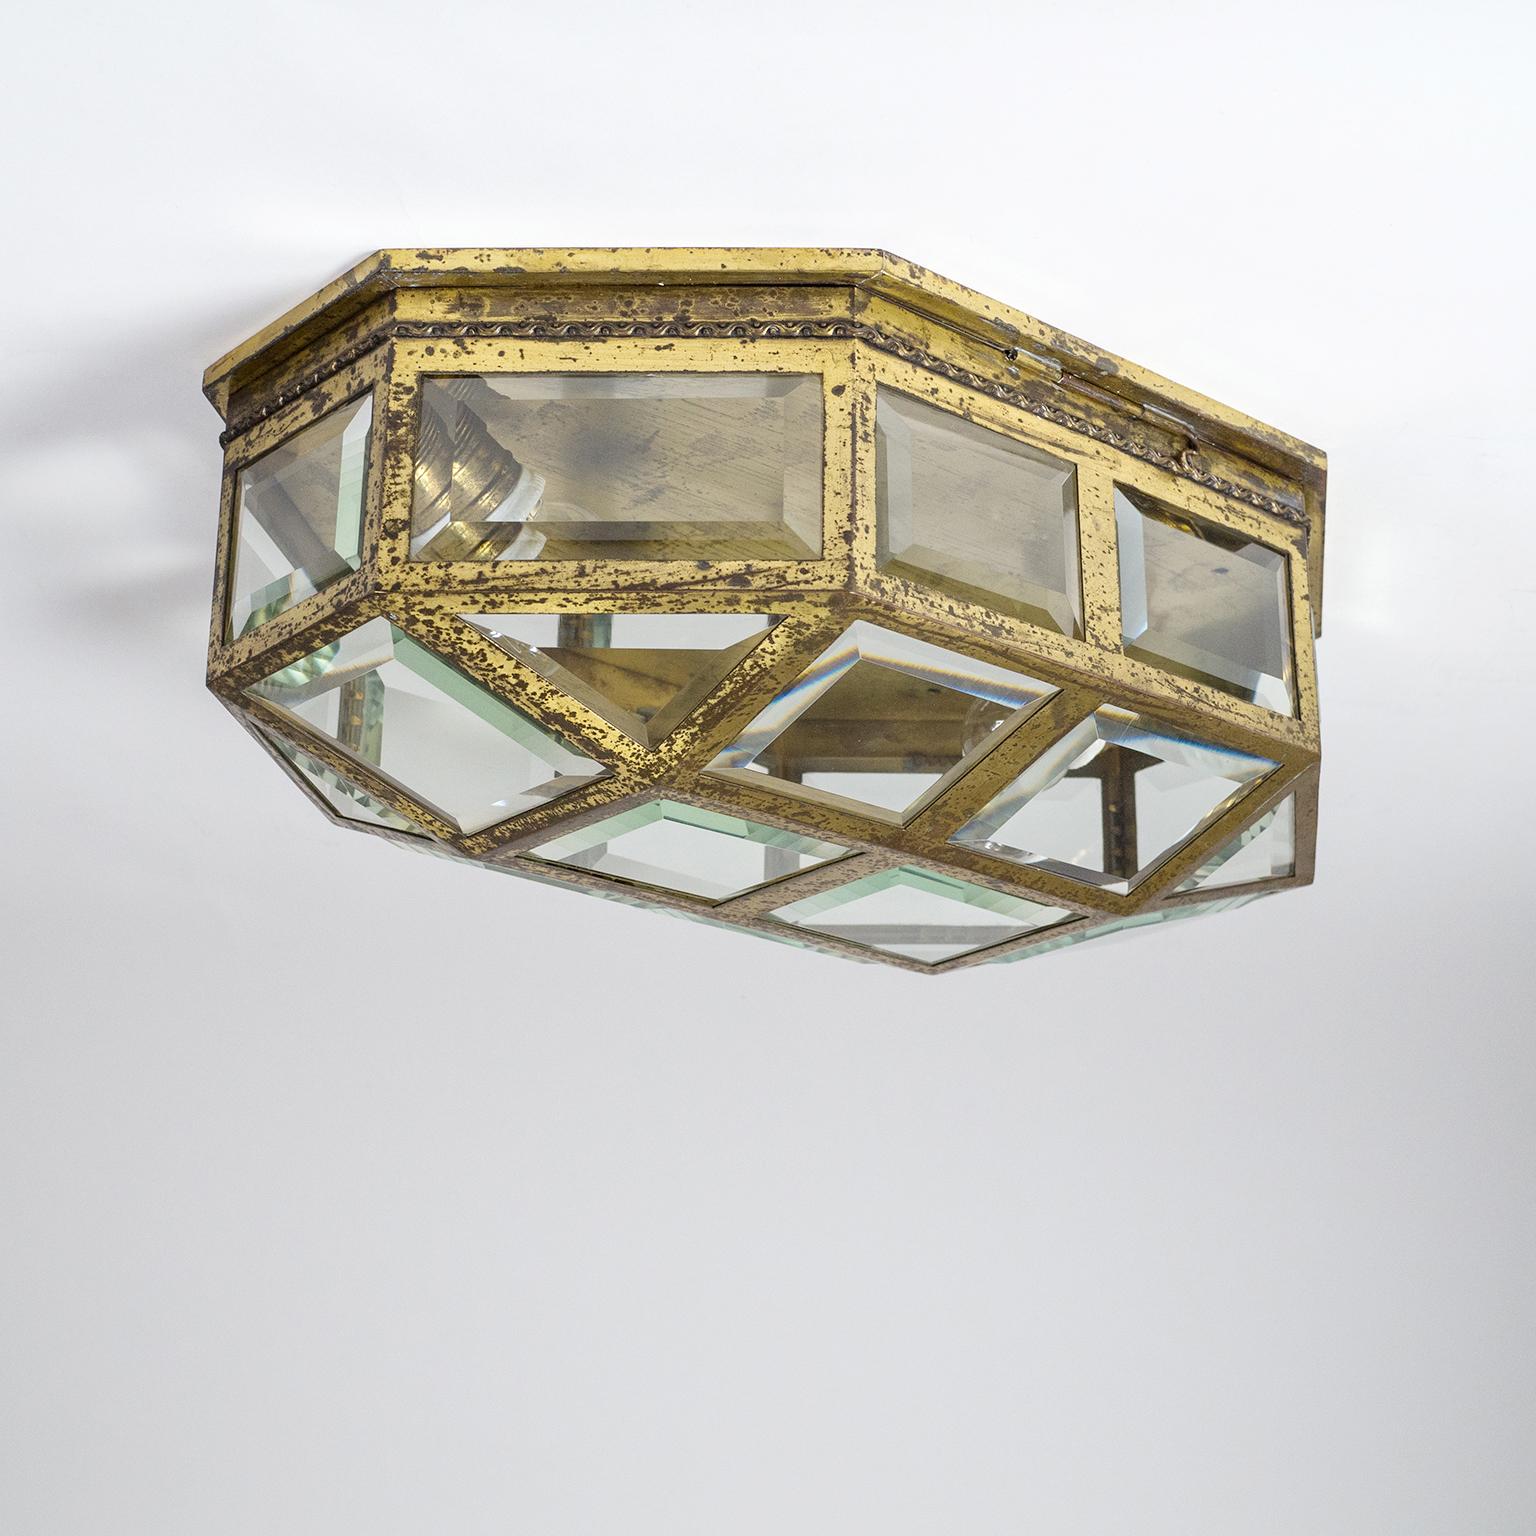 Rare large Adolf Loos style flush mount from the early 20th century in brass with faceted glass elements. The elongated octagonal structure is made entirely of brass, down to the original E27 sockets (with new wiring). This piece is extremely well